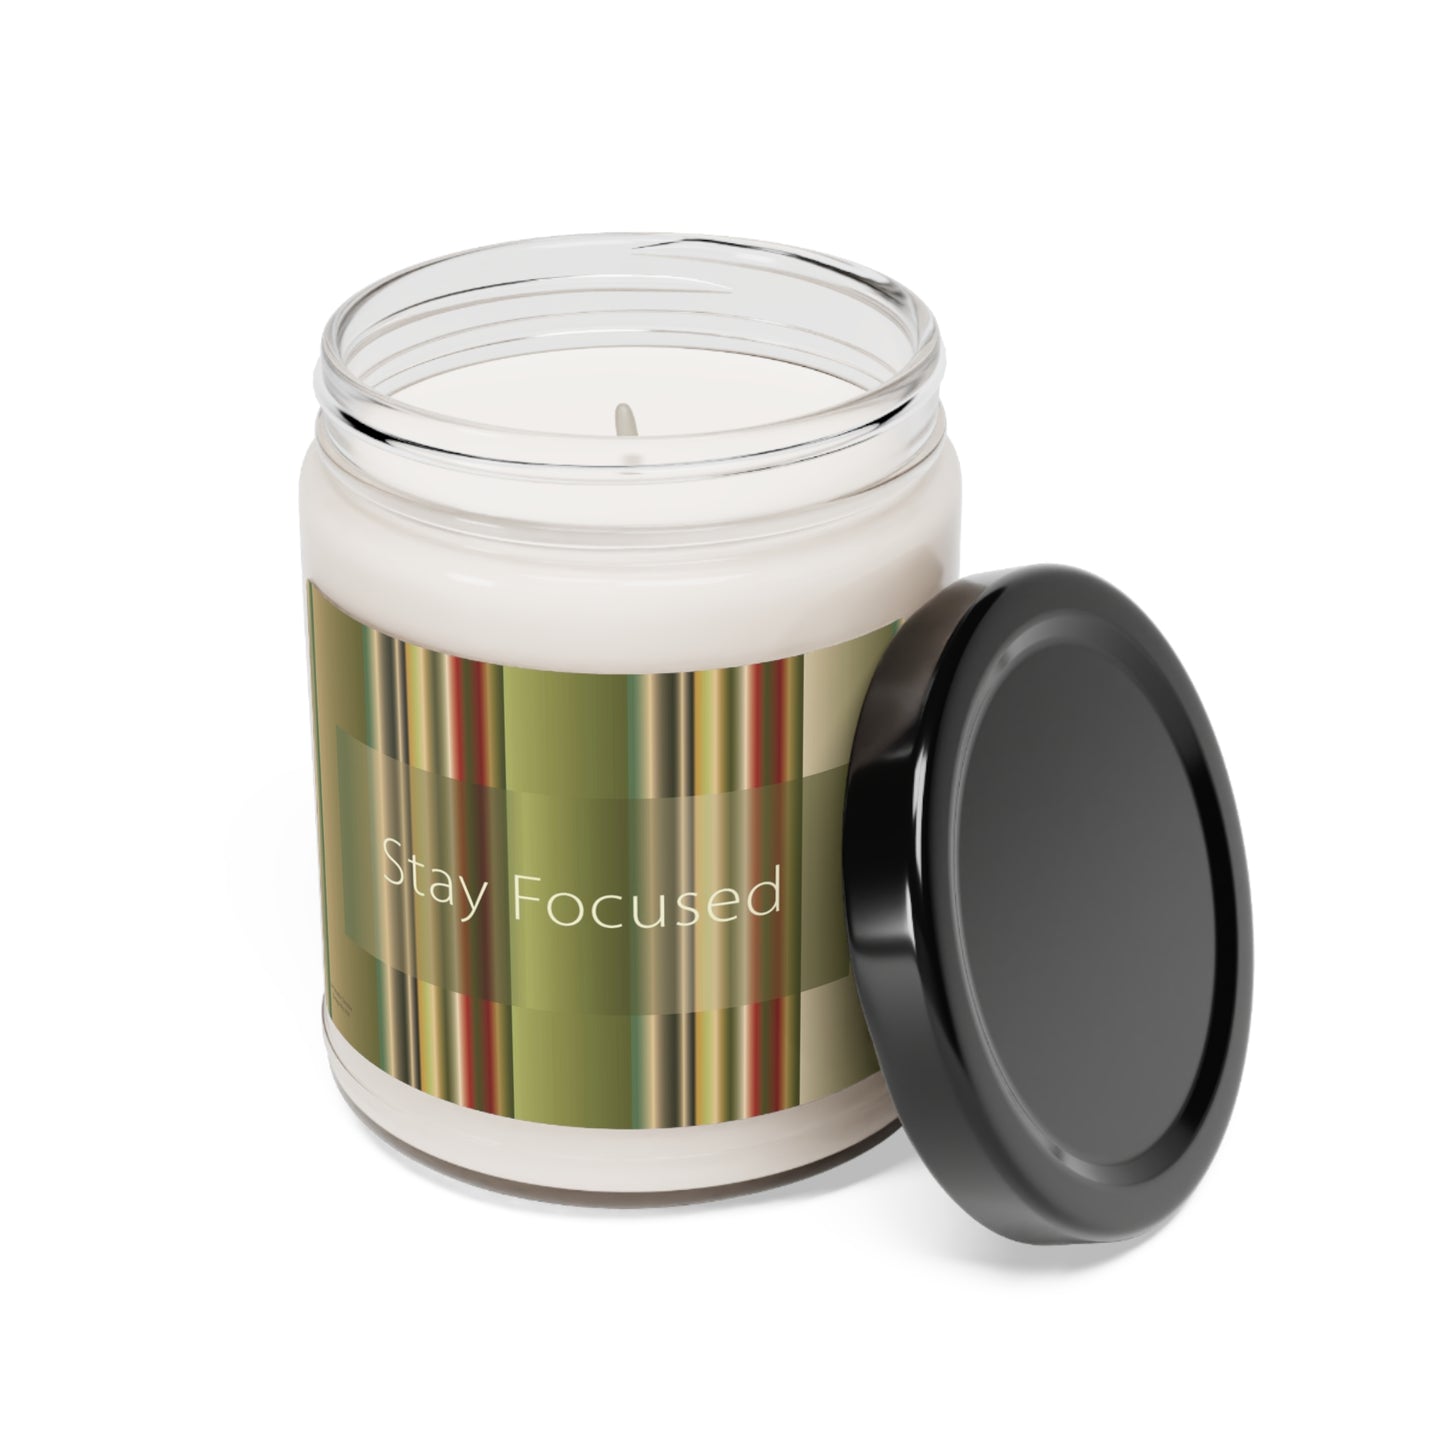 Scented Soy Candle, 9oz Stay Focused - Design No.300